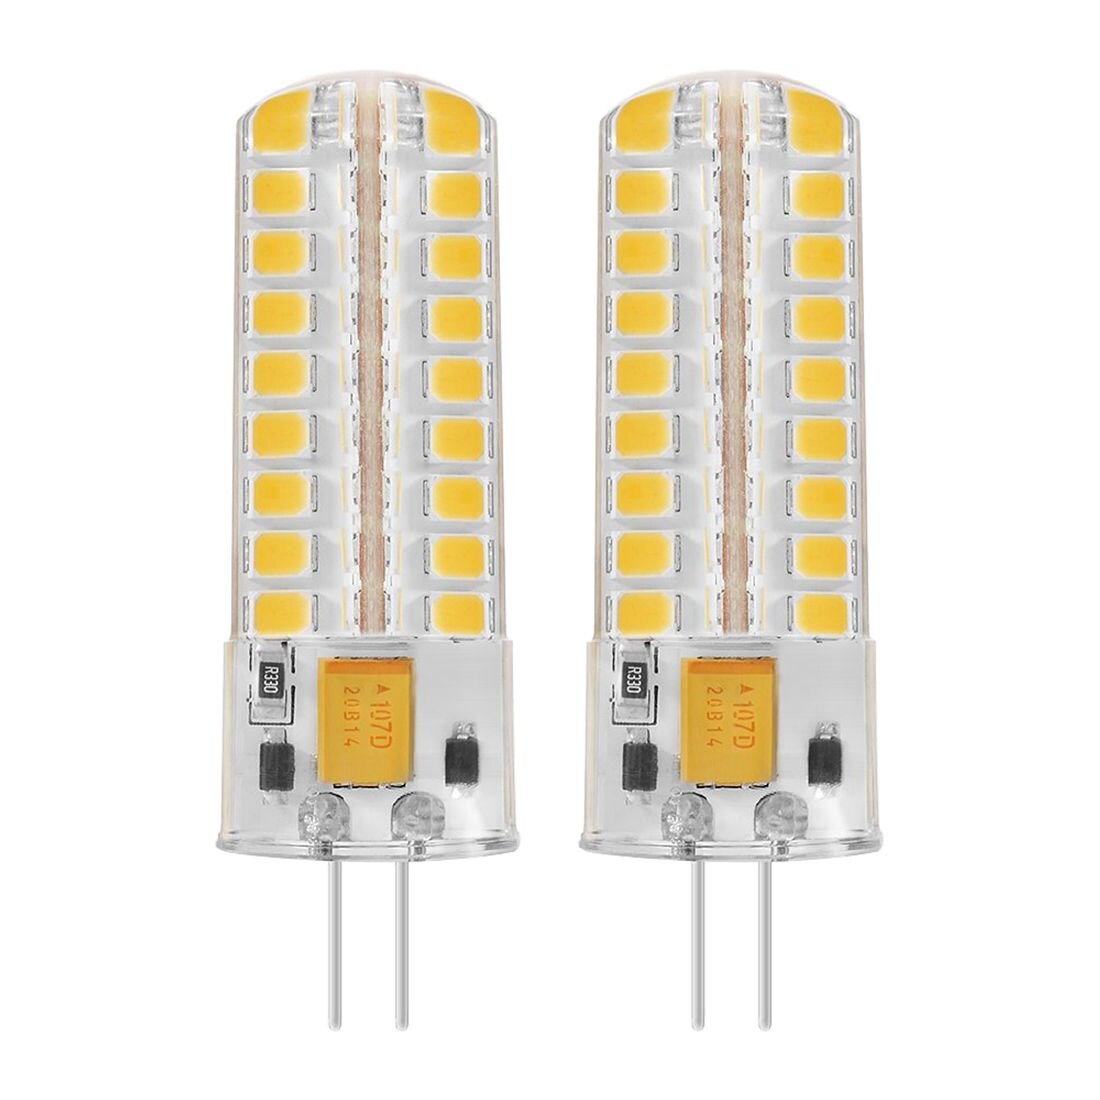 2X6.5W G4 Led-lampen 72 2835 Smd Led 50W Halogeen Lampen Equivalent 320lm Dimbare Warm Wit 3000K 360 Graden Stralingshoek Siliconen